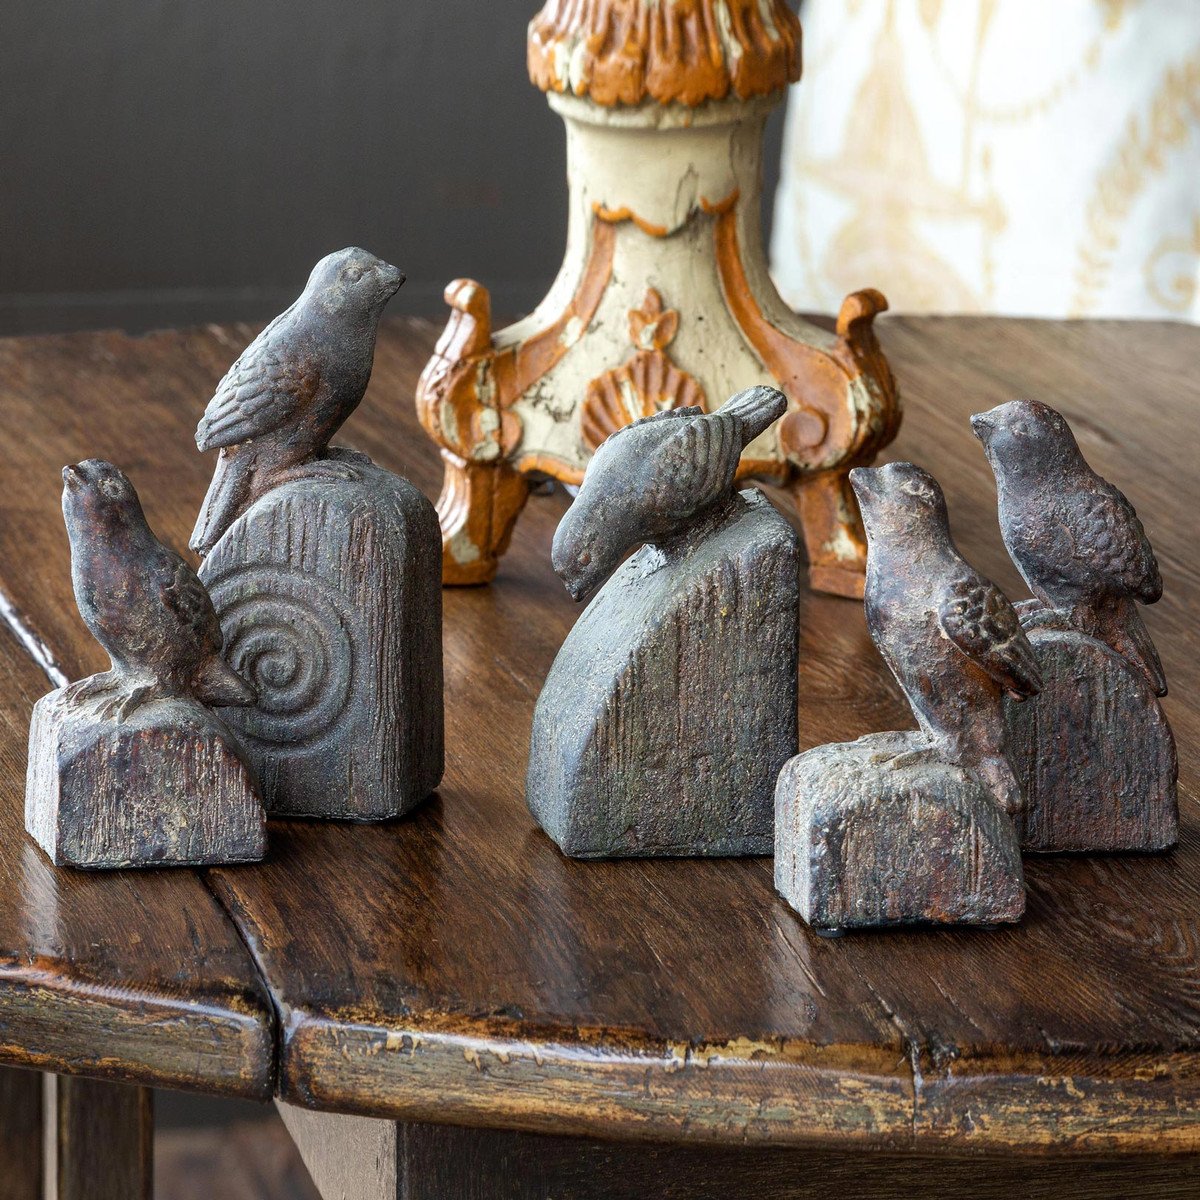 Song Bird Relics, Set of 5, Assorted Sizes